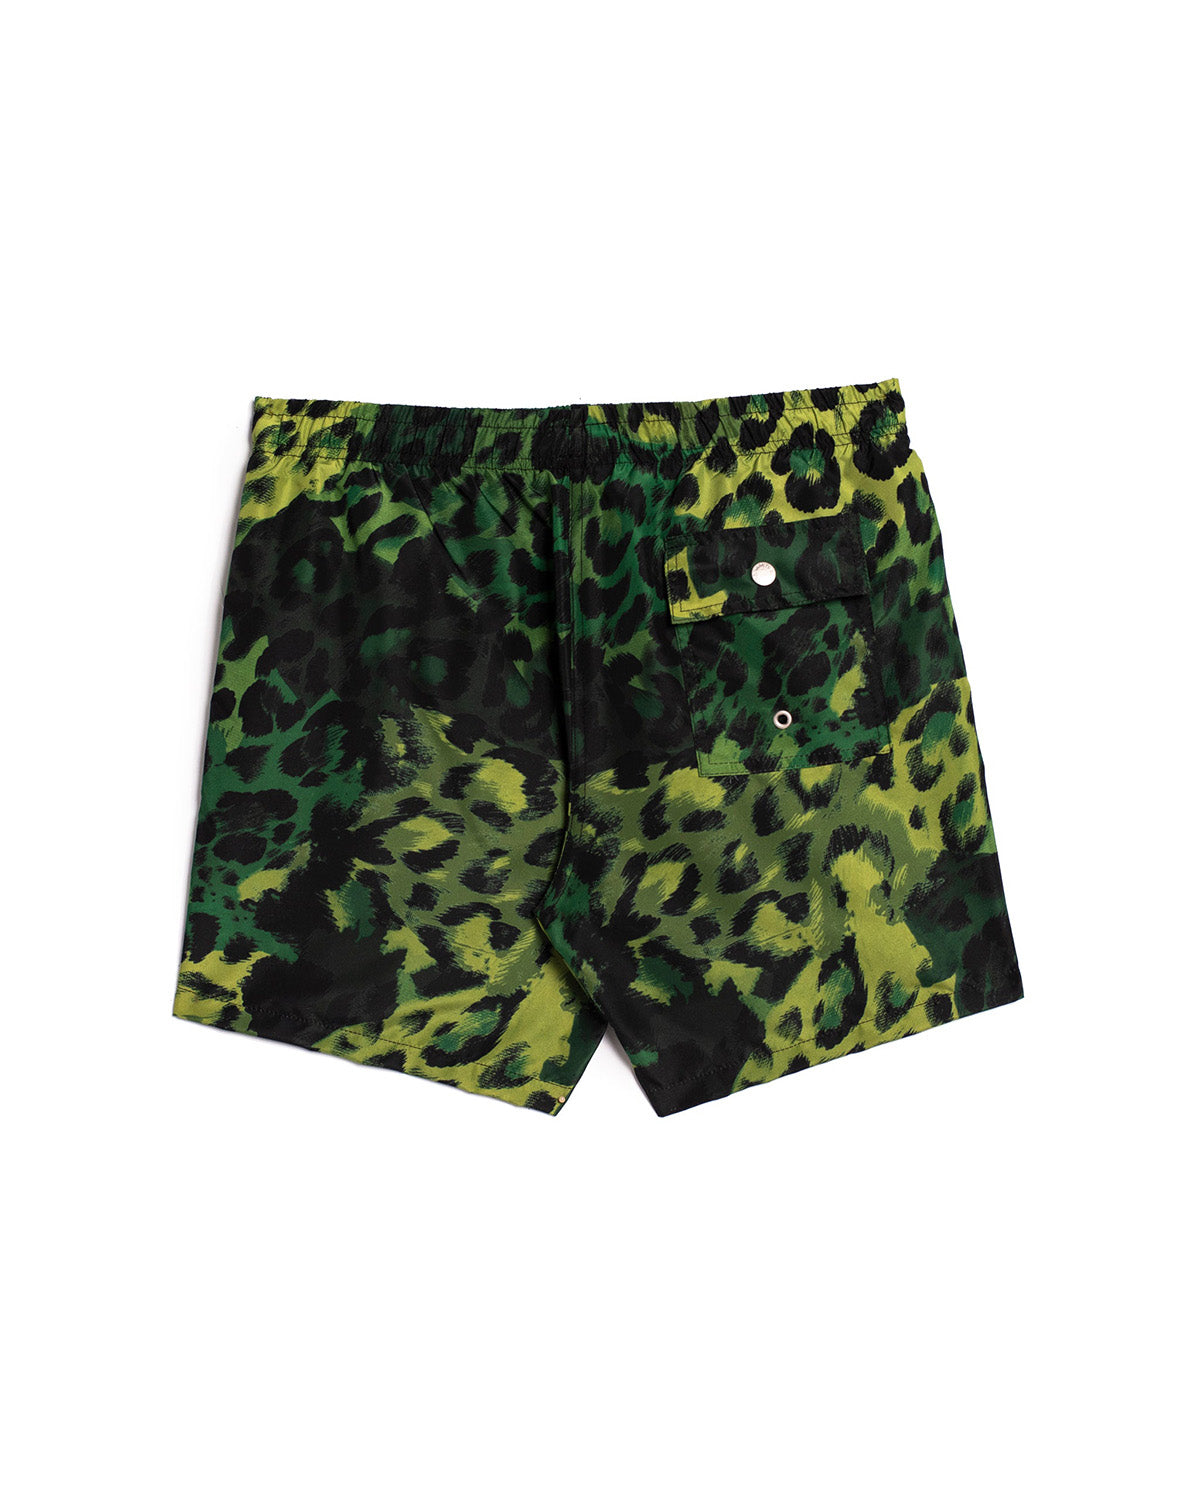 back view of green Bather swim trunk with black leopard pattern